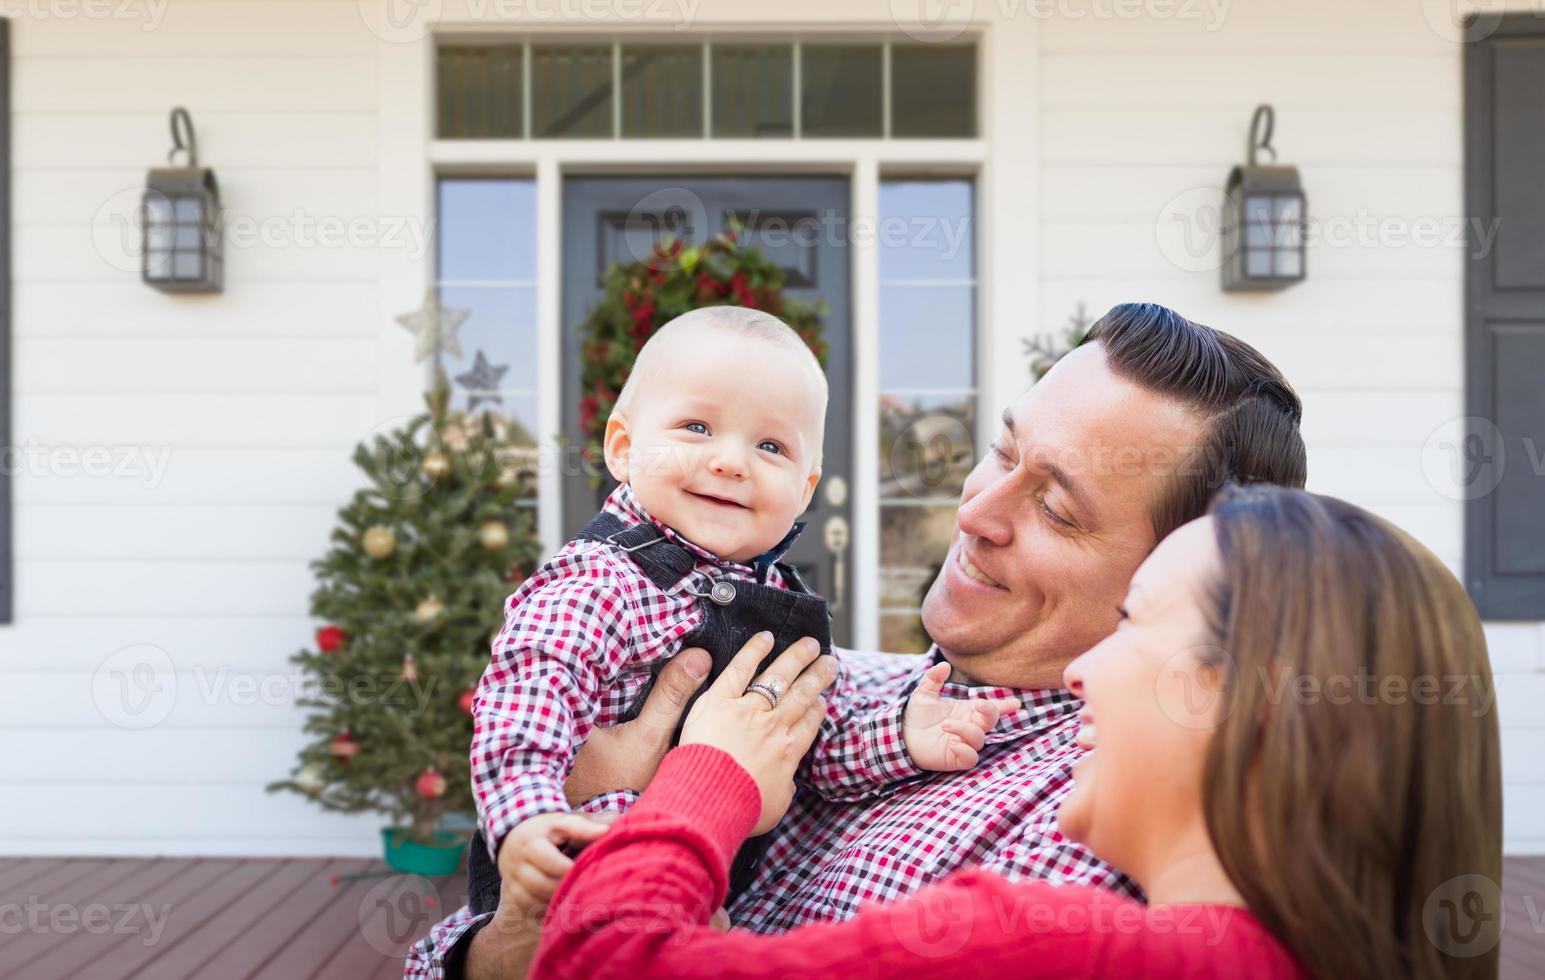 Happy Young Family On Front Porch of House With Christmas Decorations photo